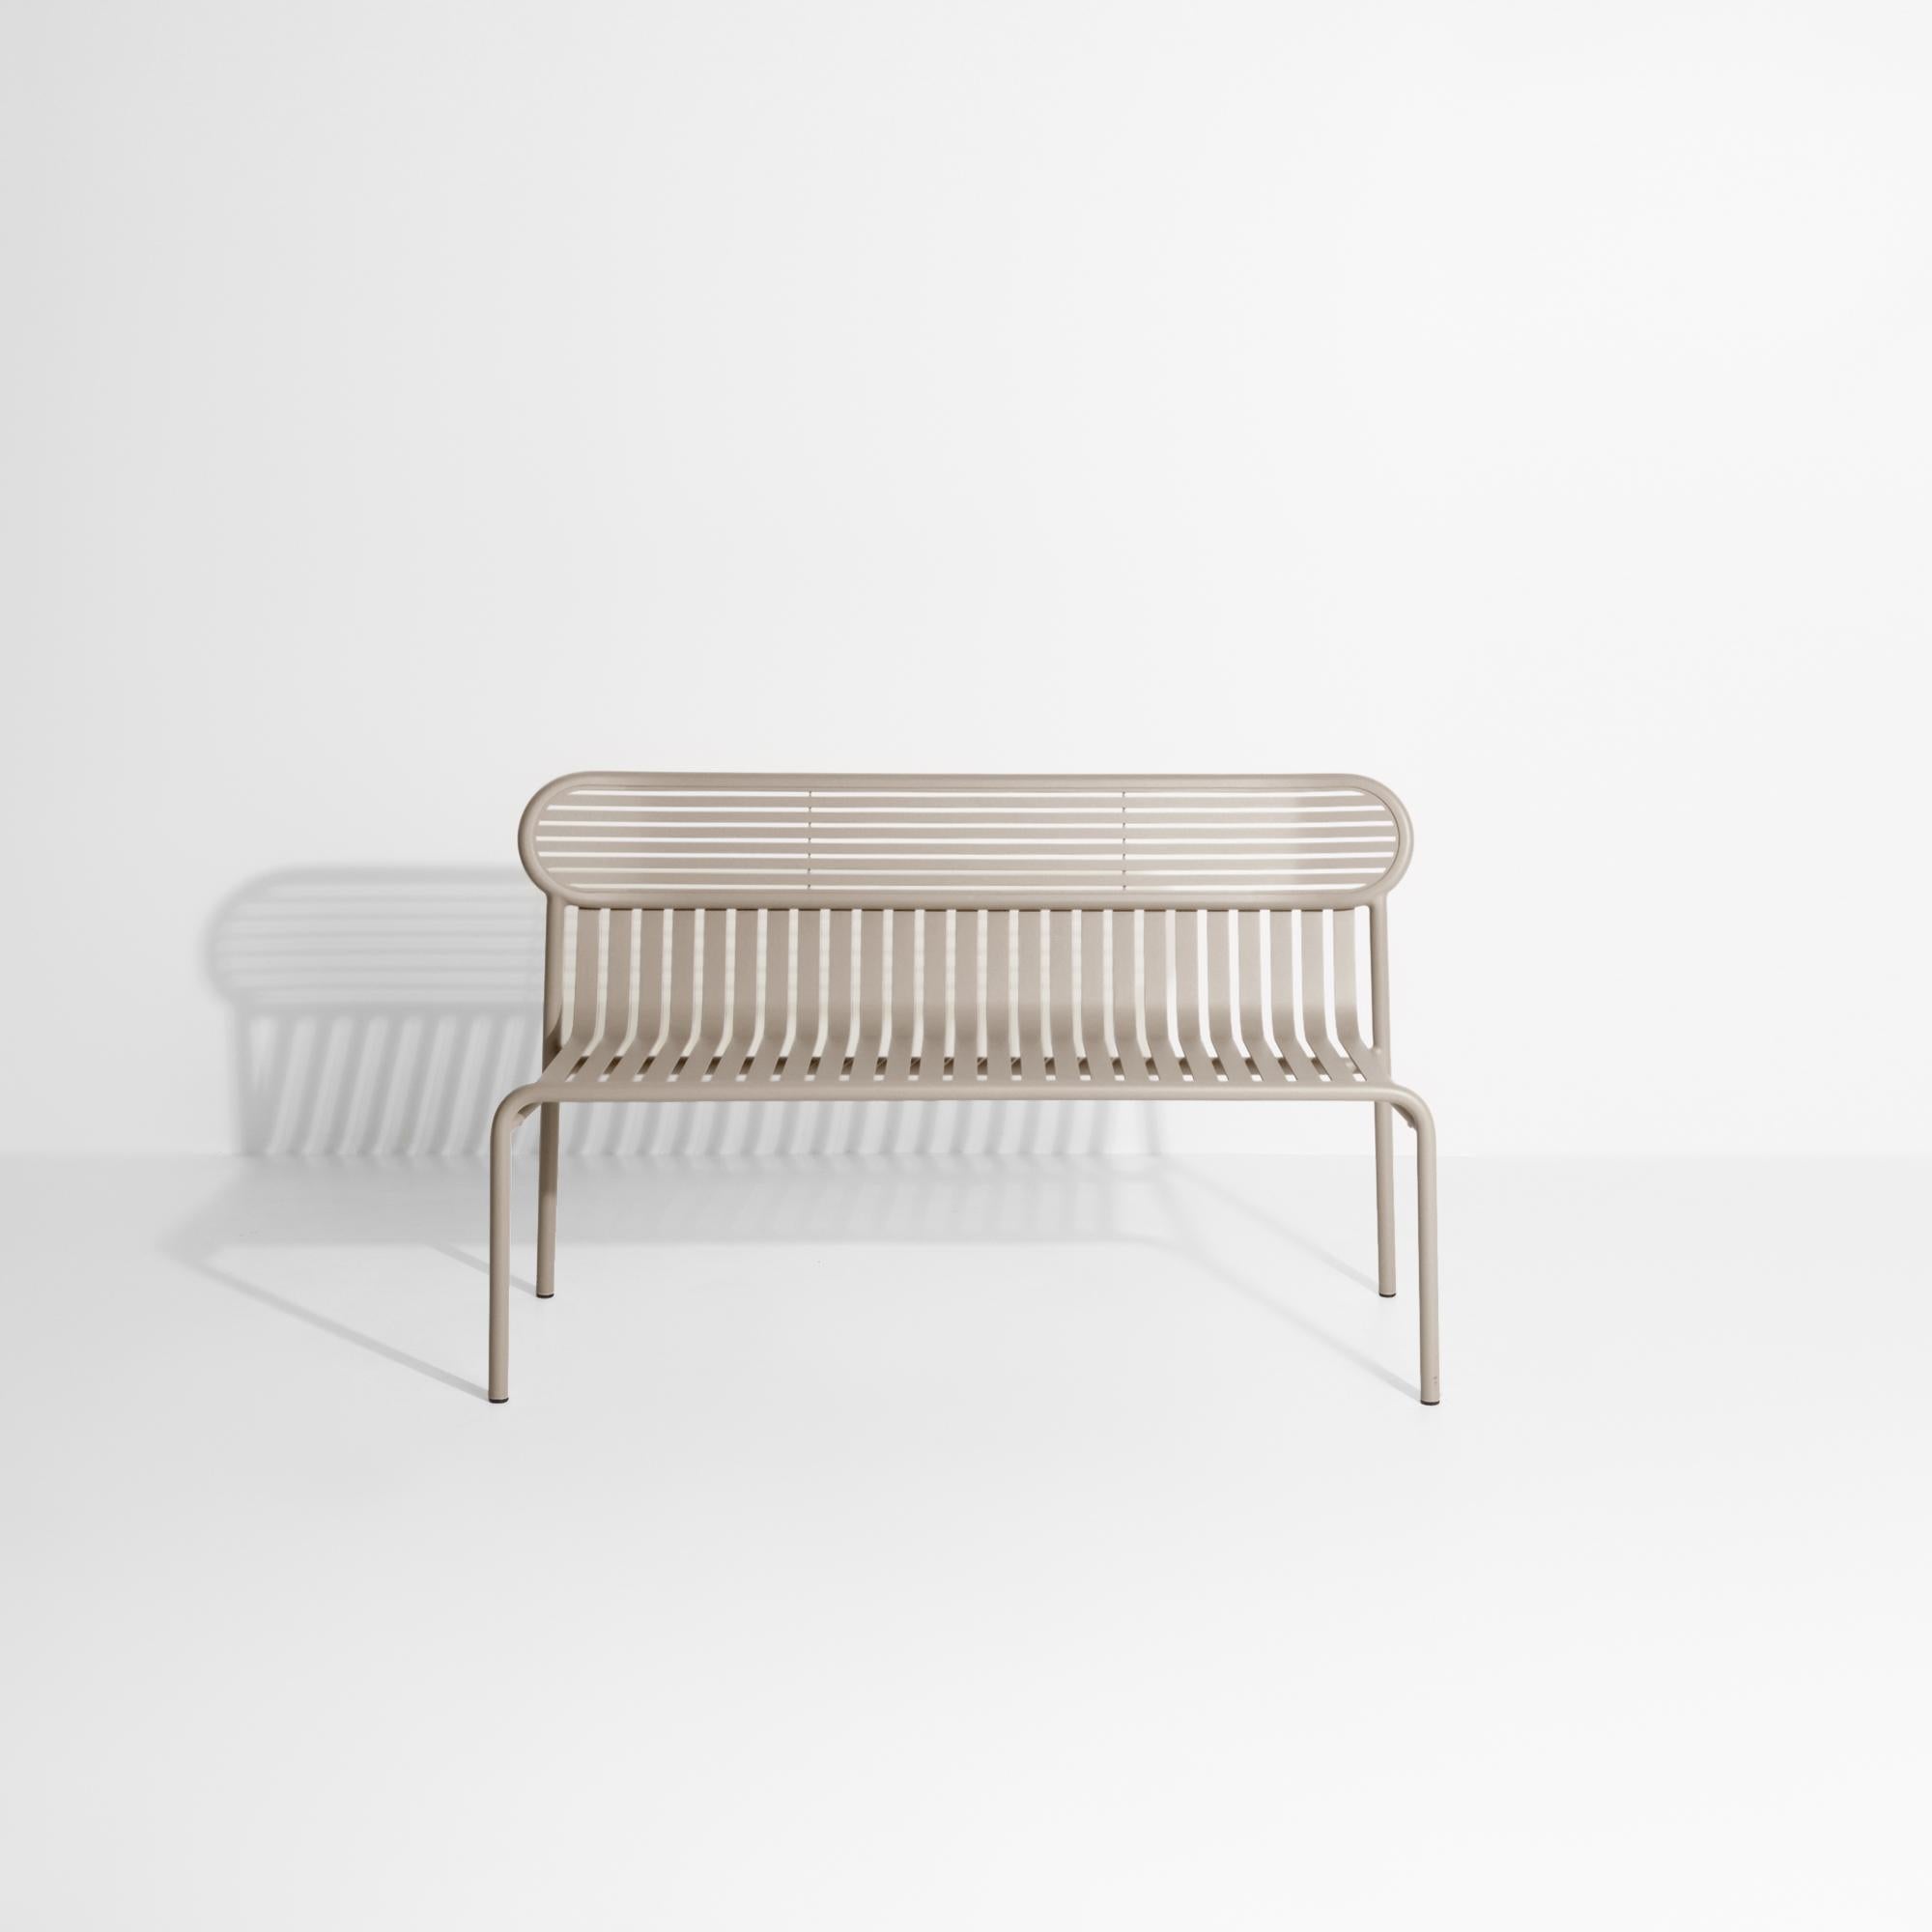 Chinese Petite Friture Week-End Bench in Dune Aluminium by Studio BrichetZiegler For Sale